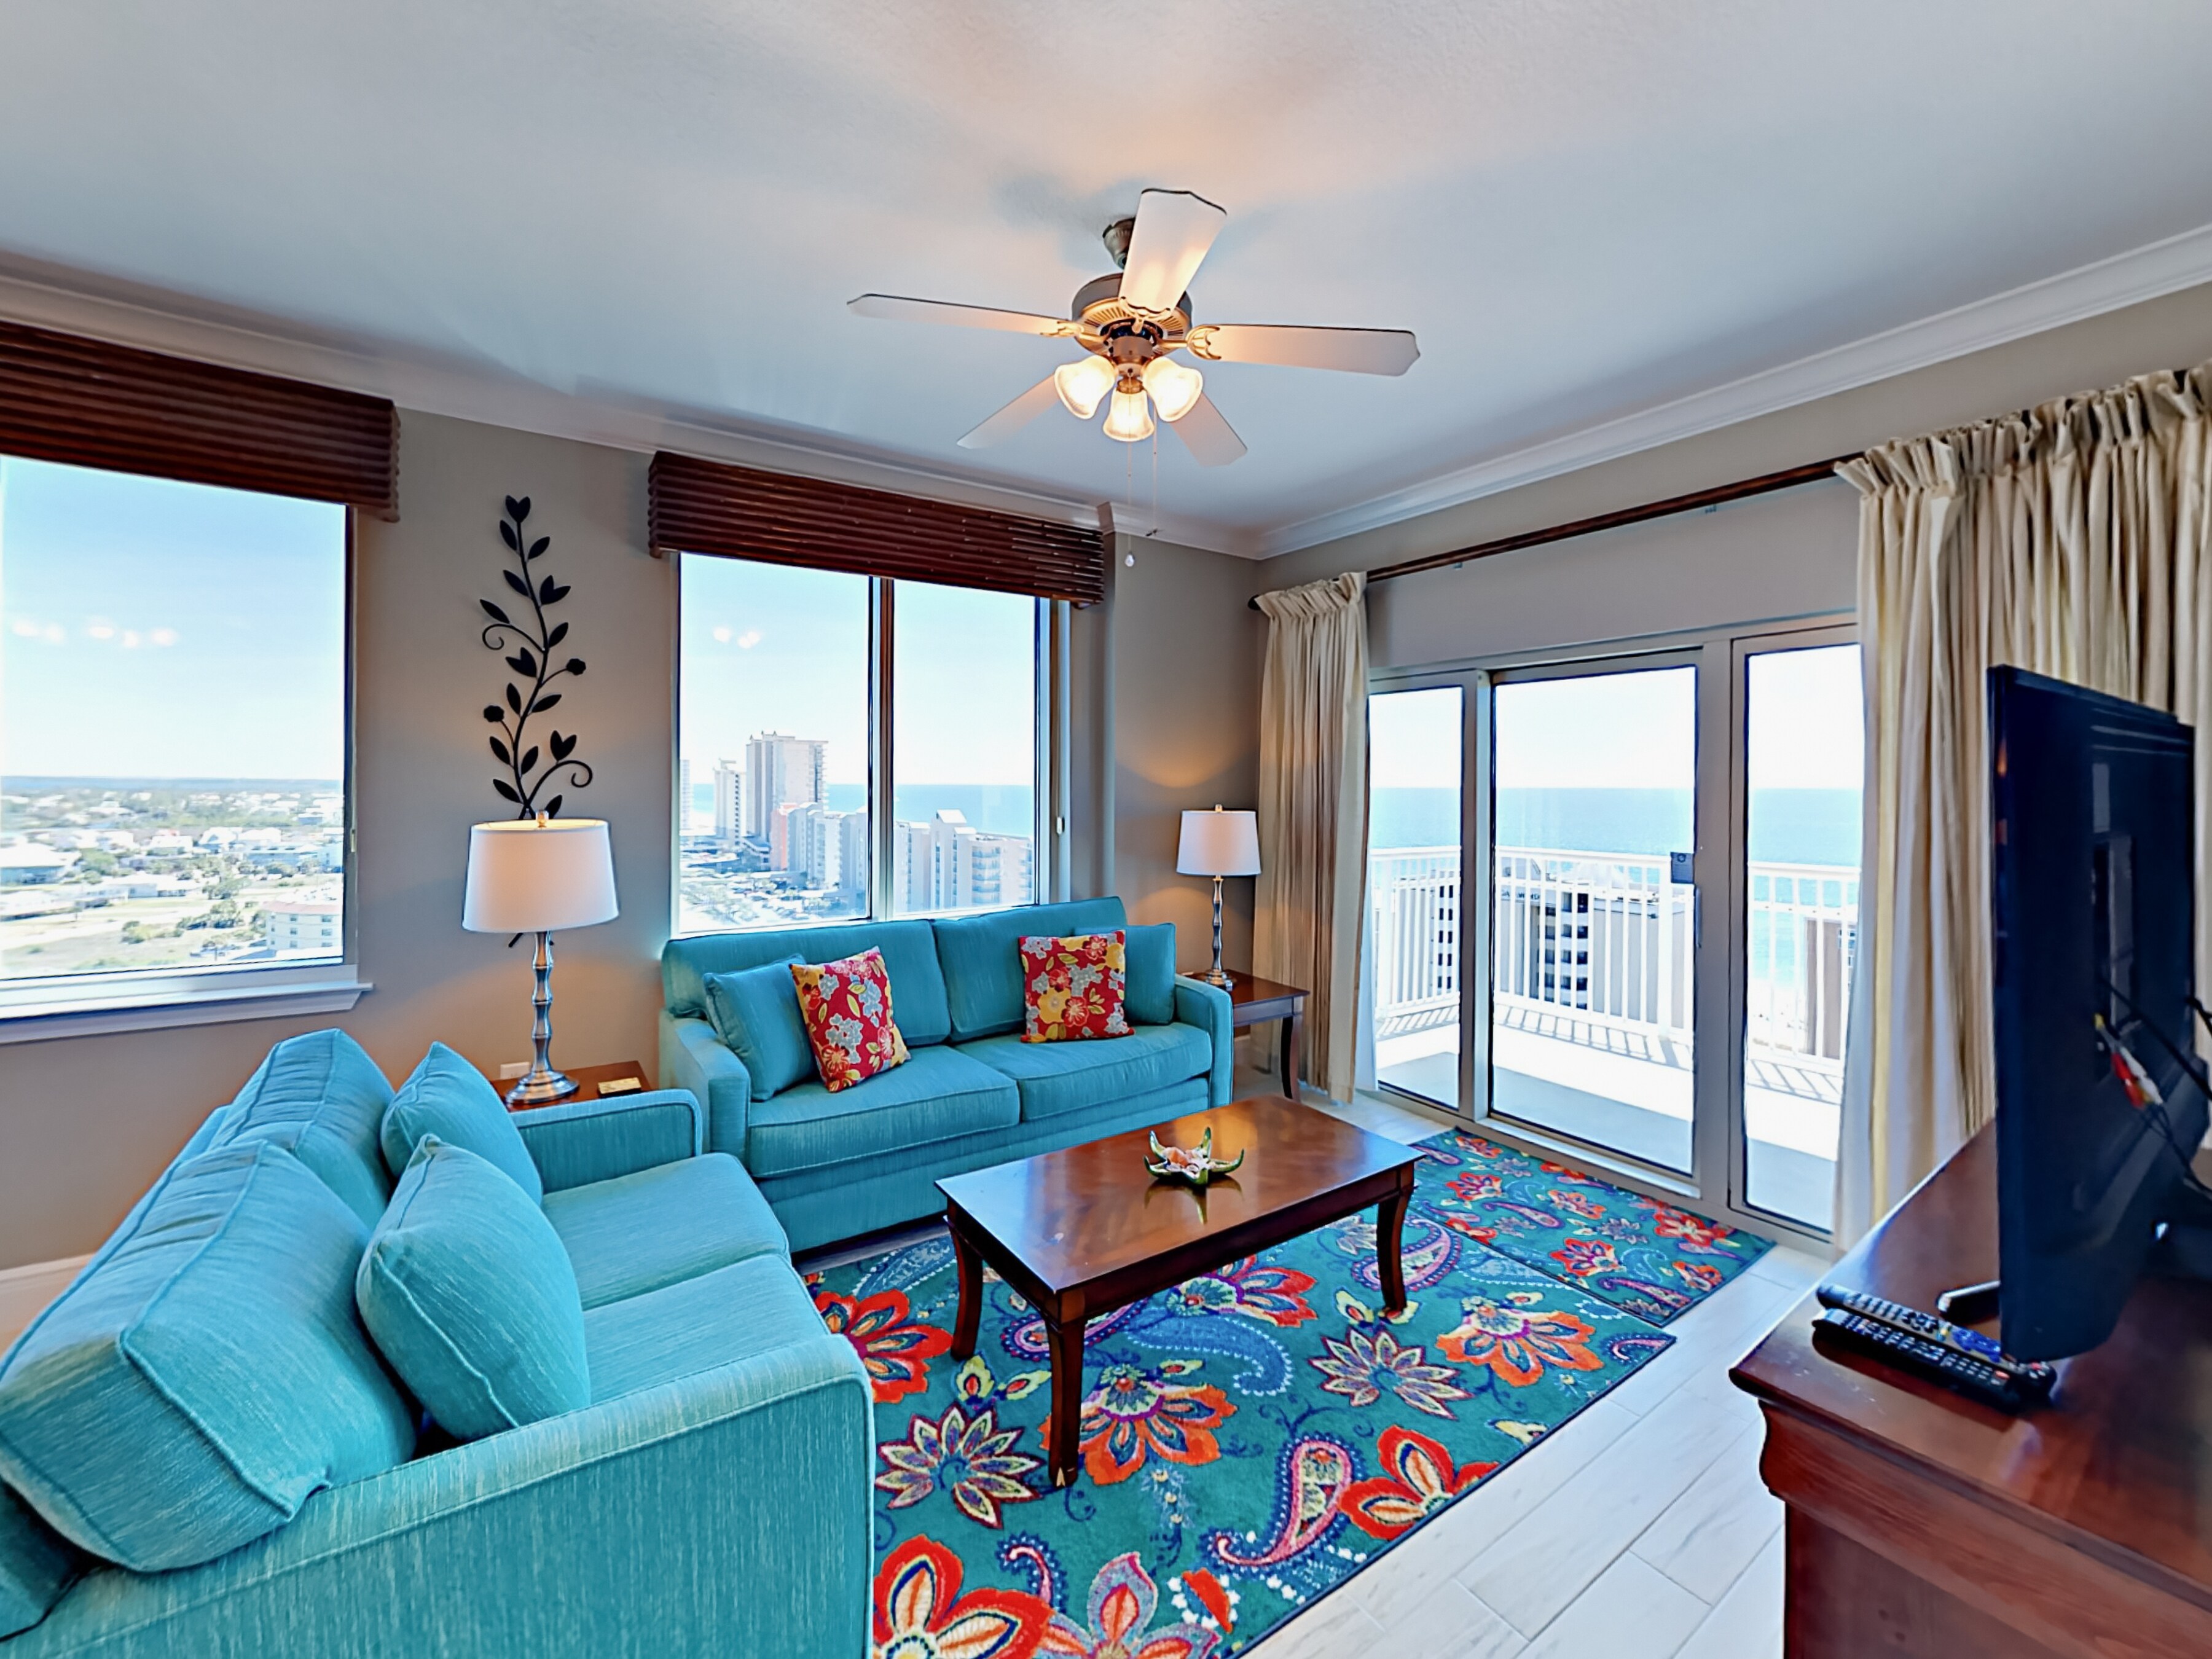 Welcome to Gulf Shores! This is a corner unit, meaning panoramic views from 2 balconies. Inside, light wooden floors and high ceilings make the space airy and bright.